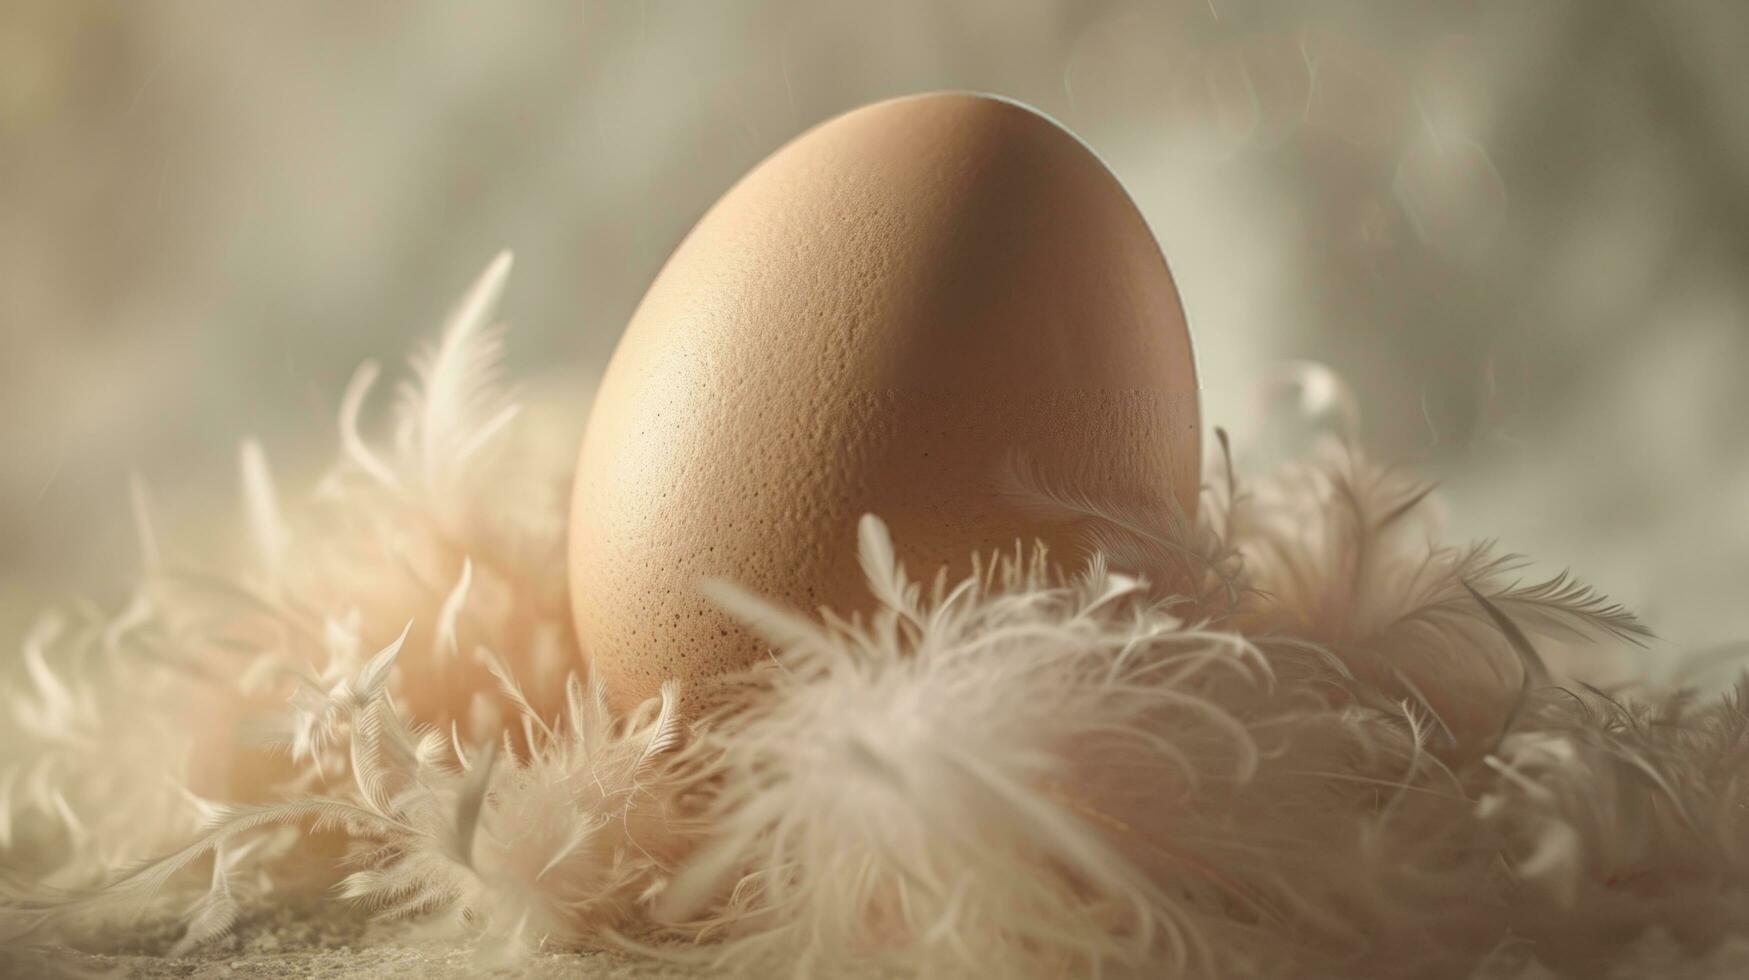 AI generated an egg with feathers and feathers on a surface photo